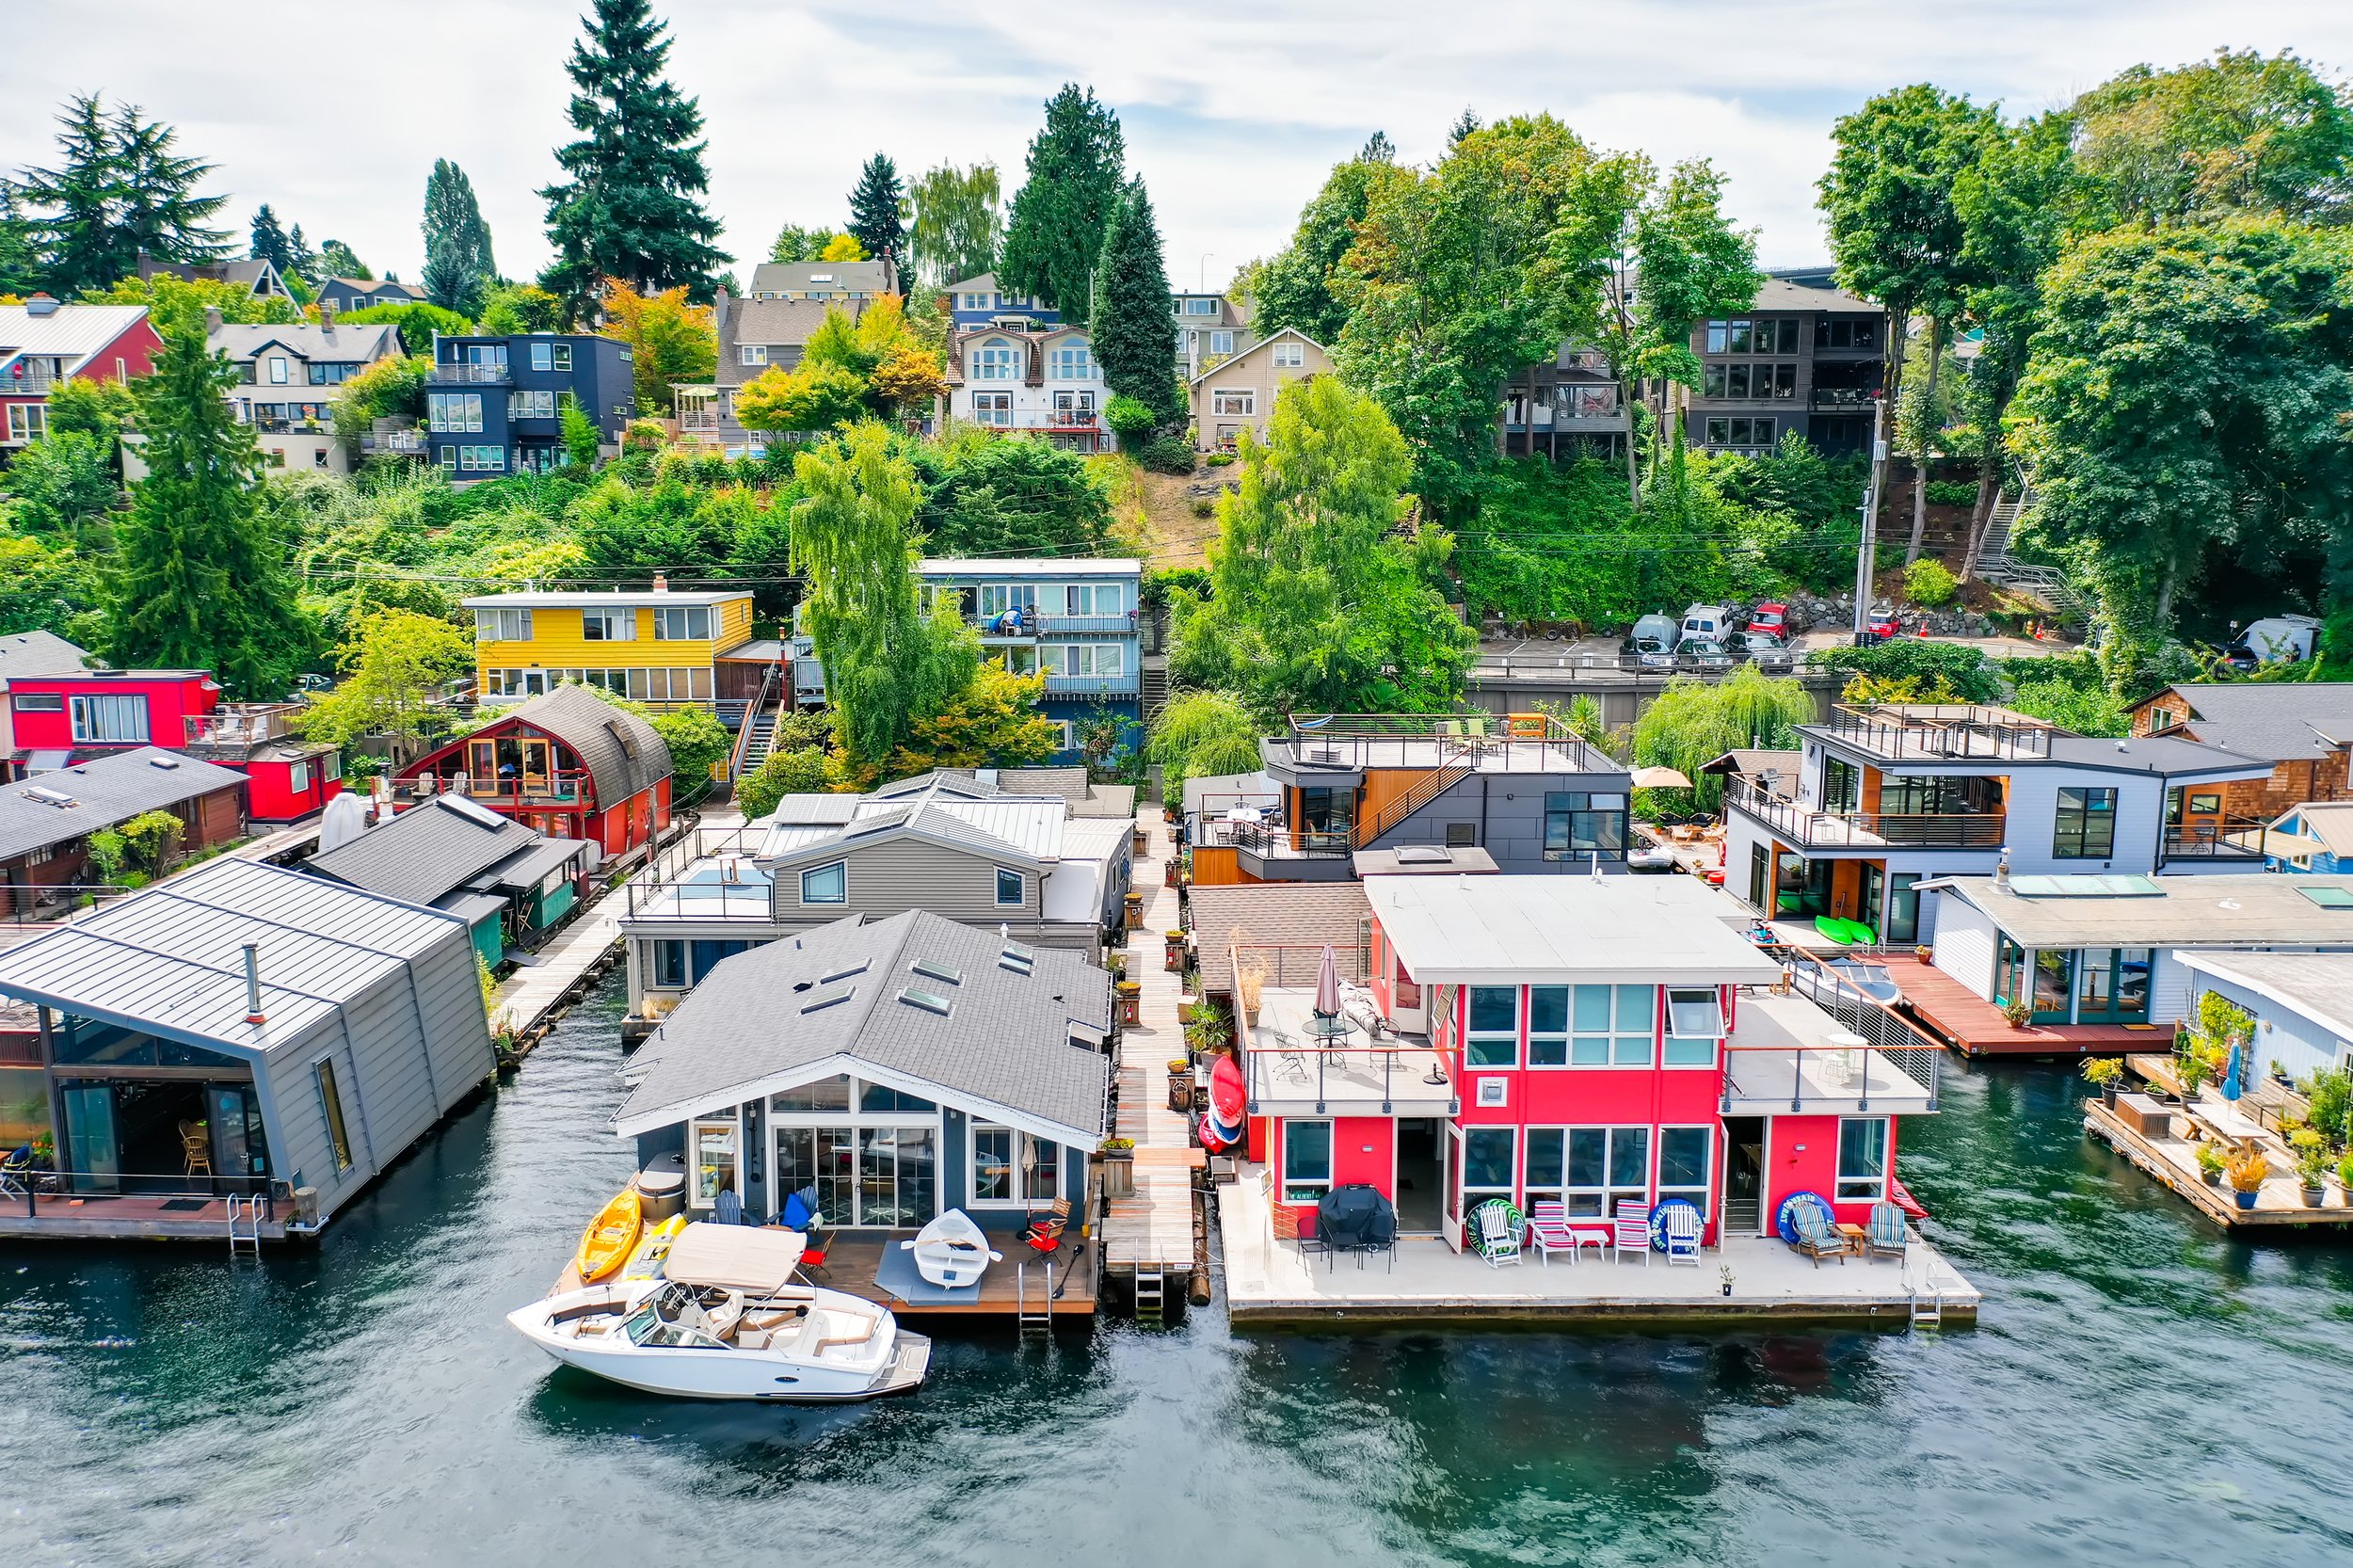 Three end of dock houseboats in Seattle in the Portage Bay neighborhood.